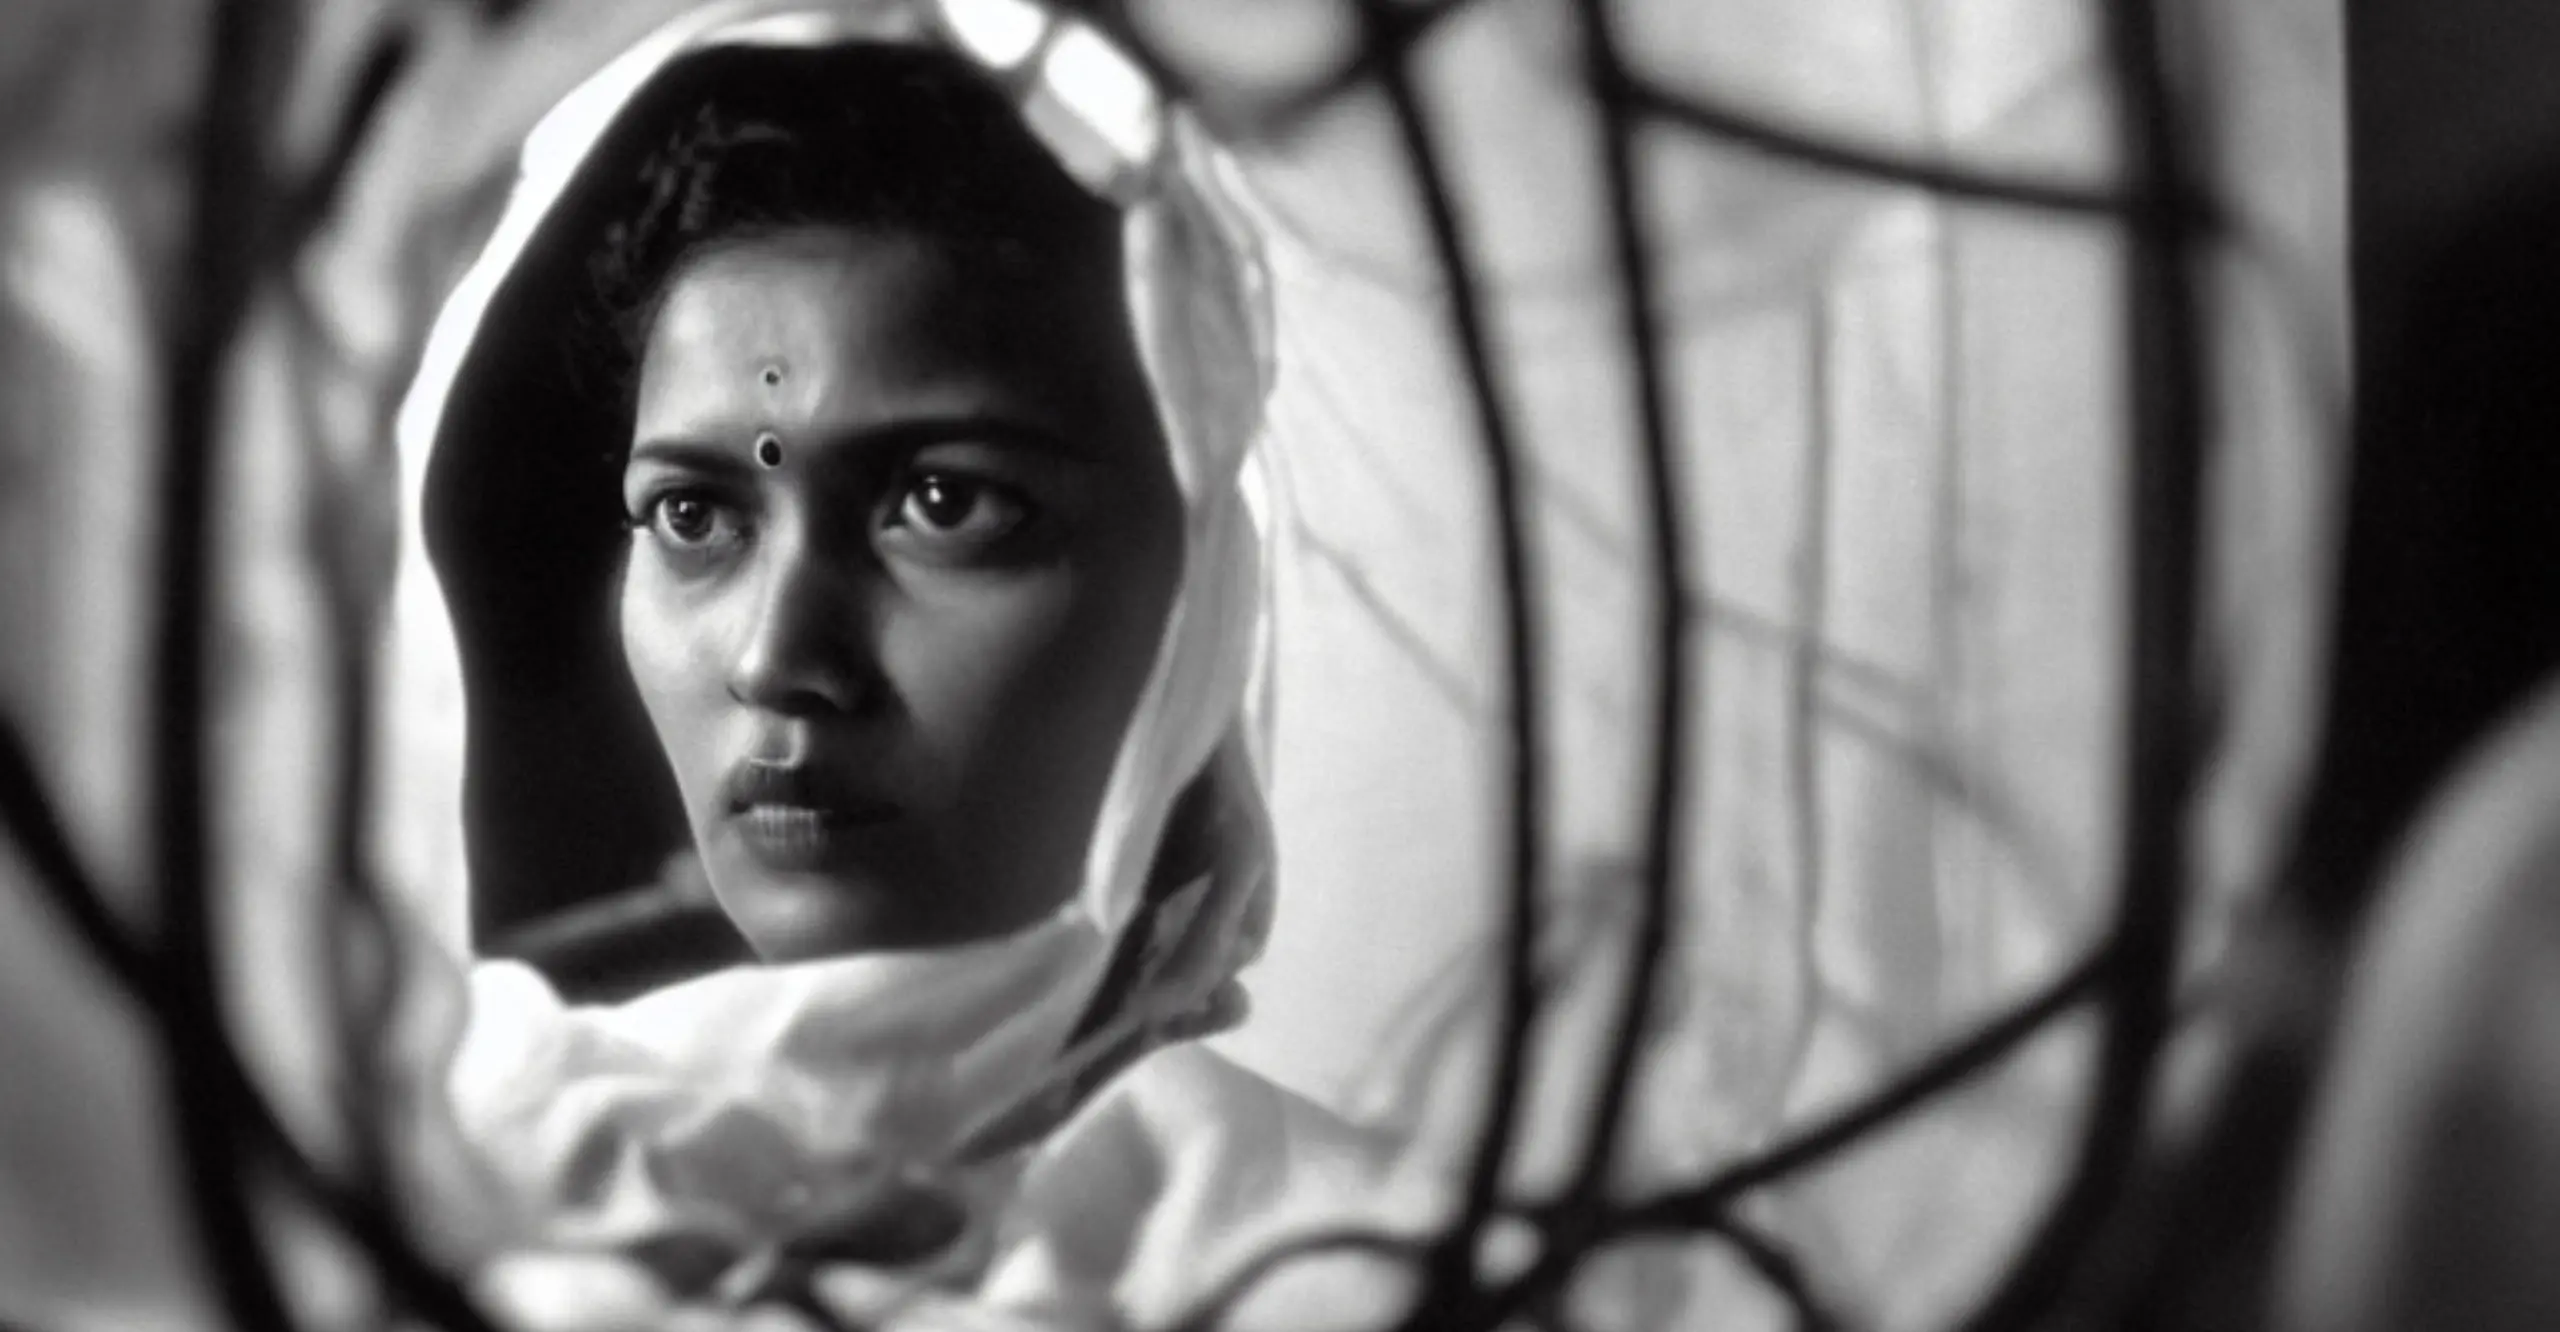 A black and white image of a woman with two bindis, a dot in the forehead, and a blurred background